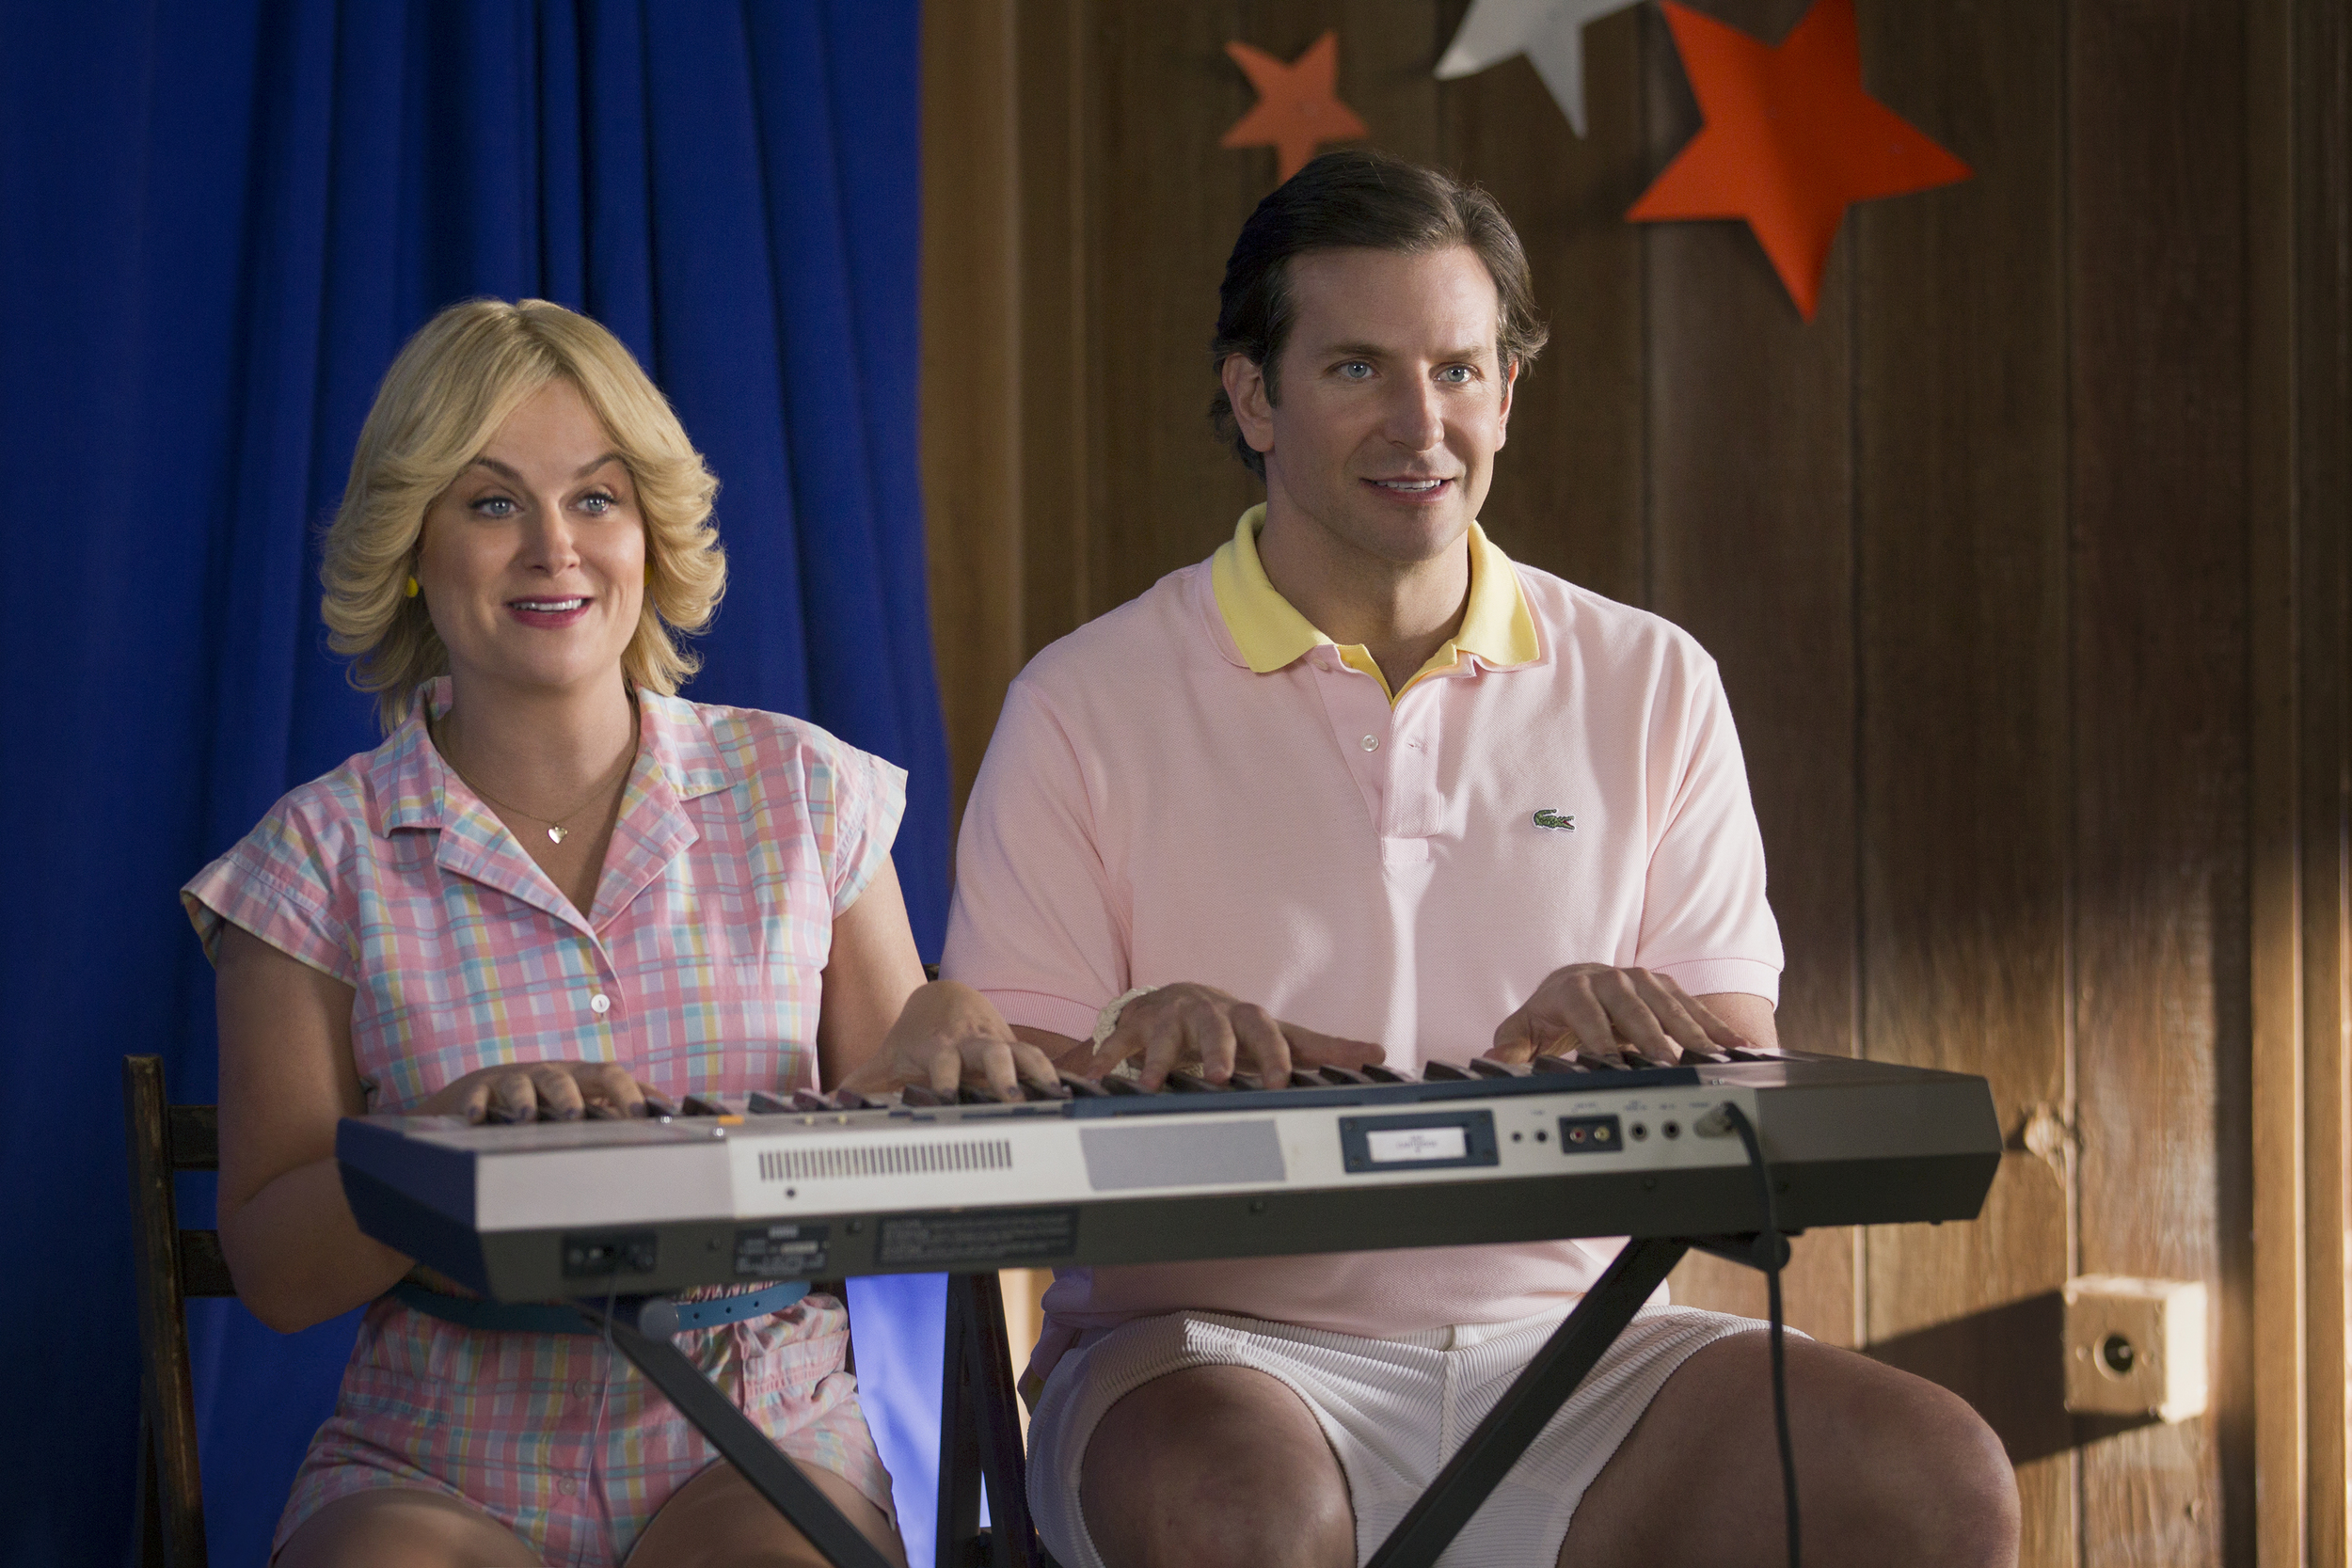    Amy Poehler and Bradley Cooper in the Netflix original series “Wet Hot American Summer: First Day Of Camp”.  Photo by: Saeed Adyani/Netflix  